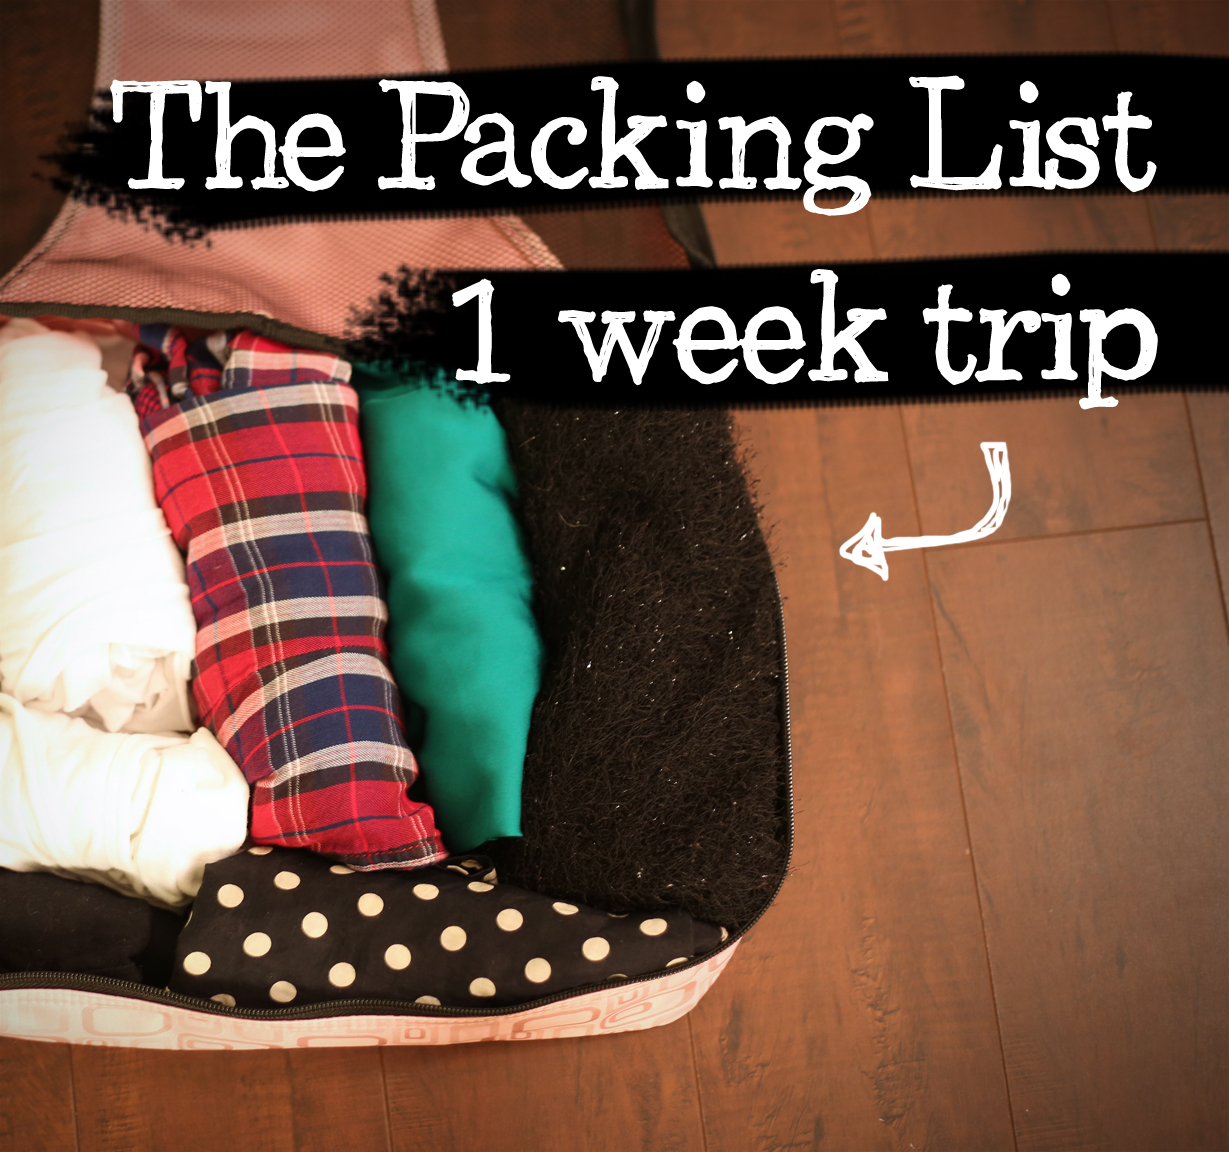 25 Family Road Trip Essentials Help With What to Pack for a Road Trip